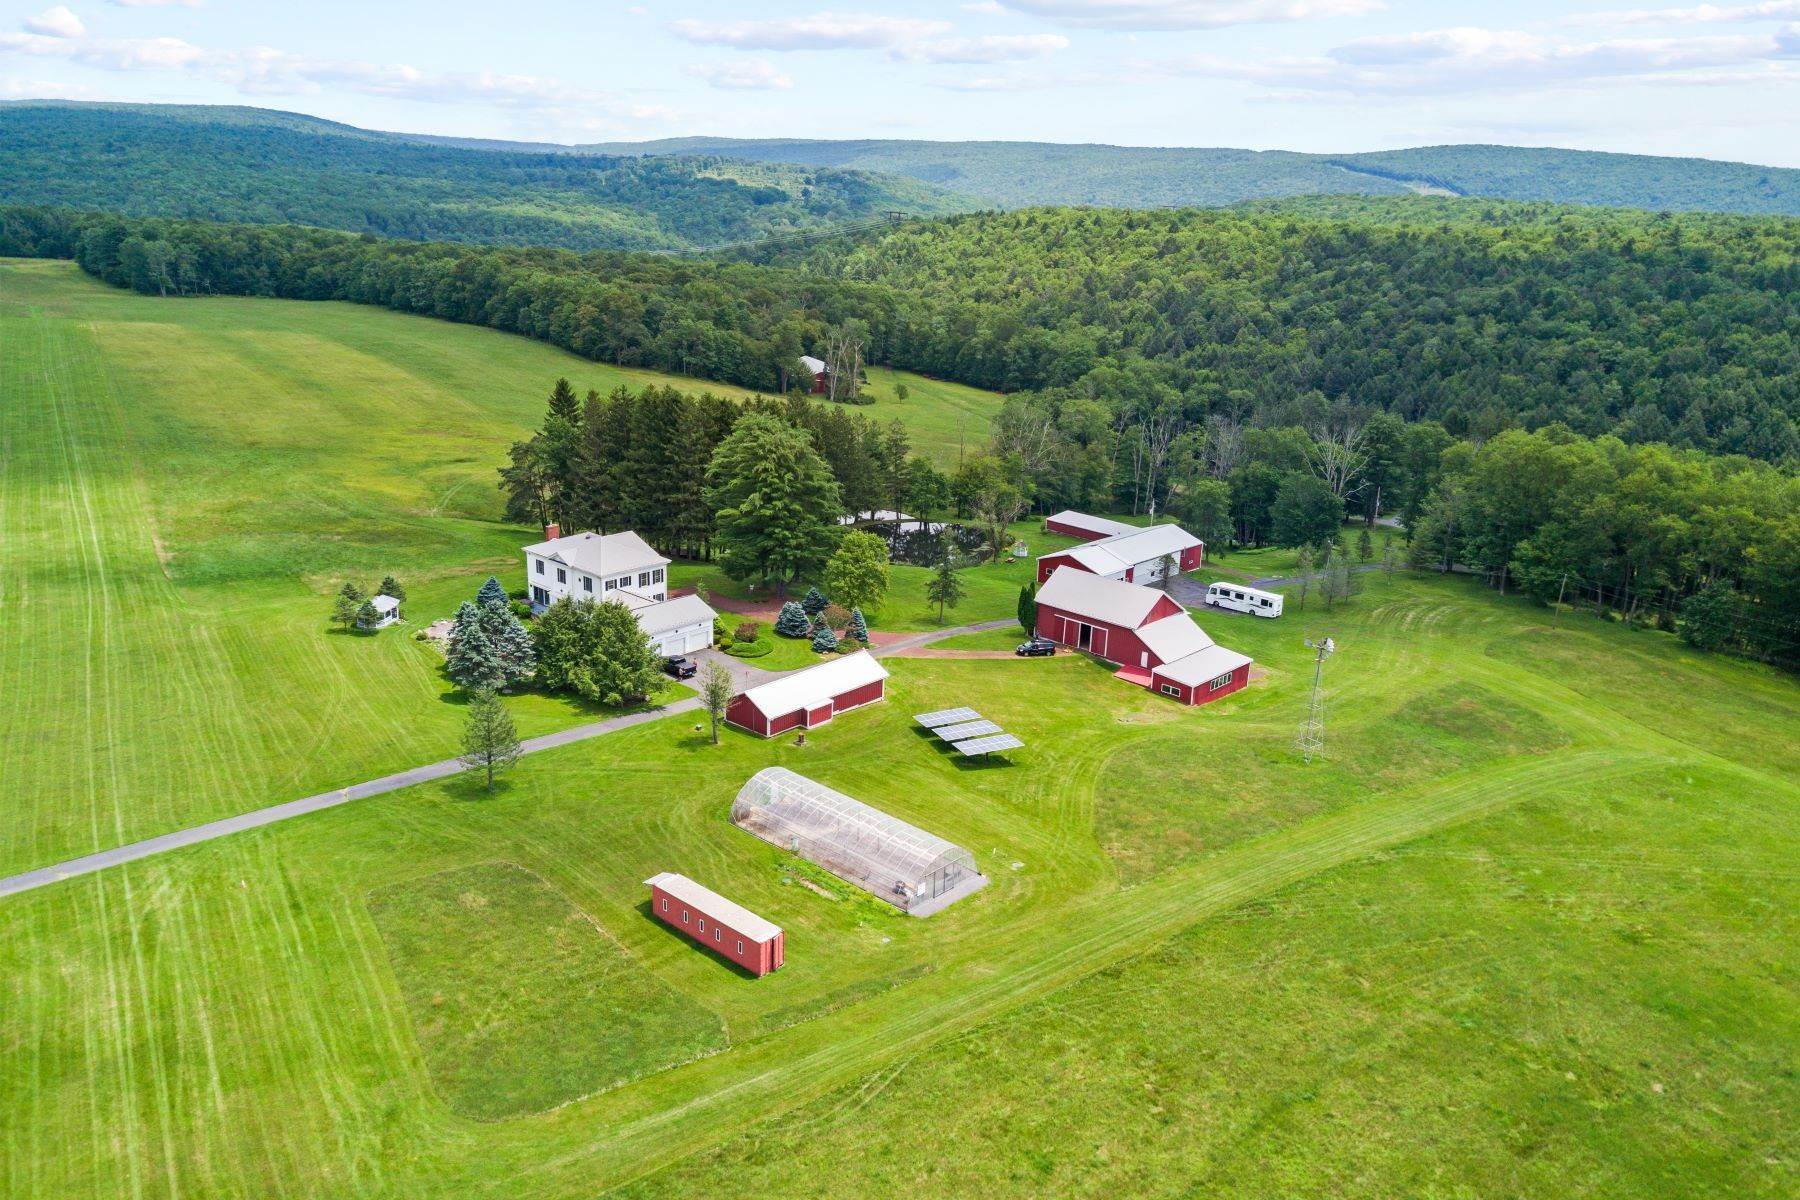 Property for Sale at 207 Saw Mill Road Weatherly, Pennsylvania 18255 United States